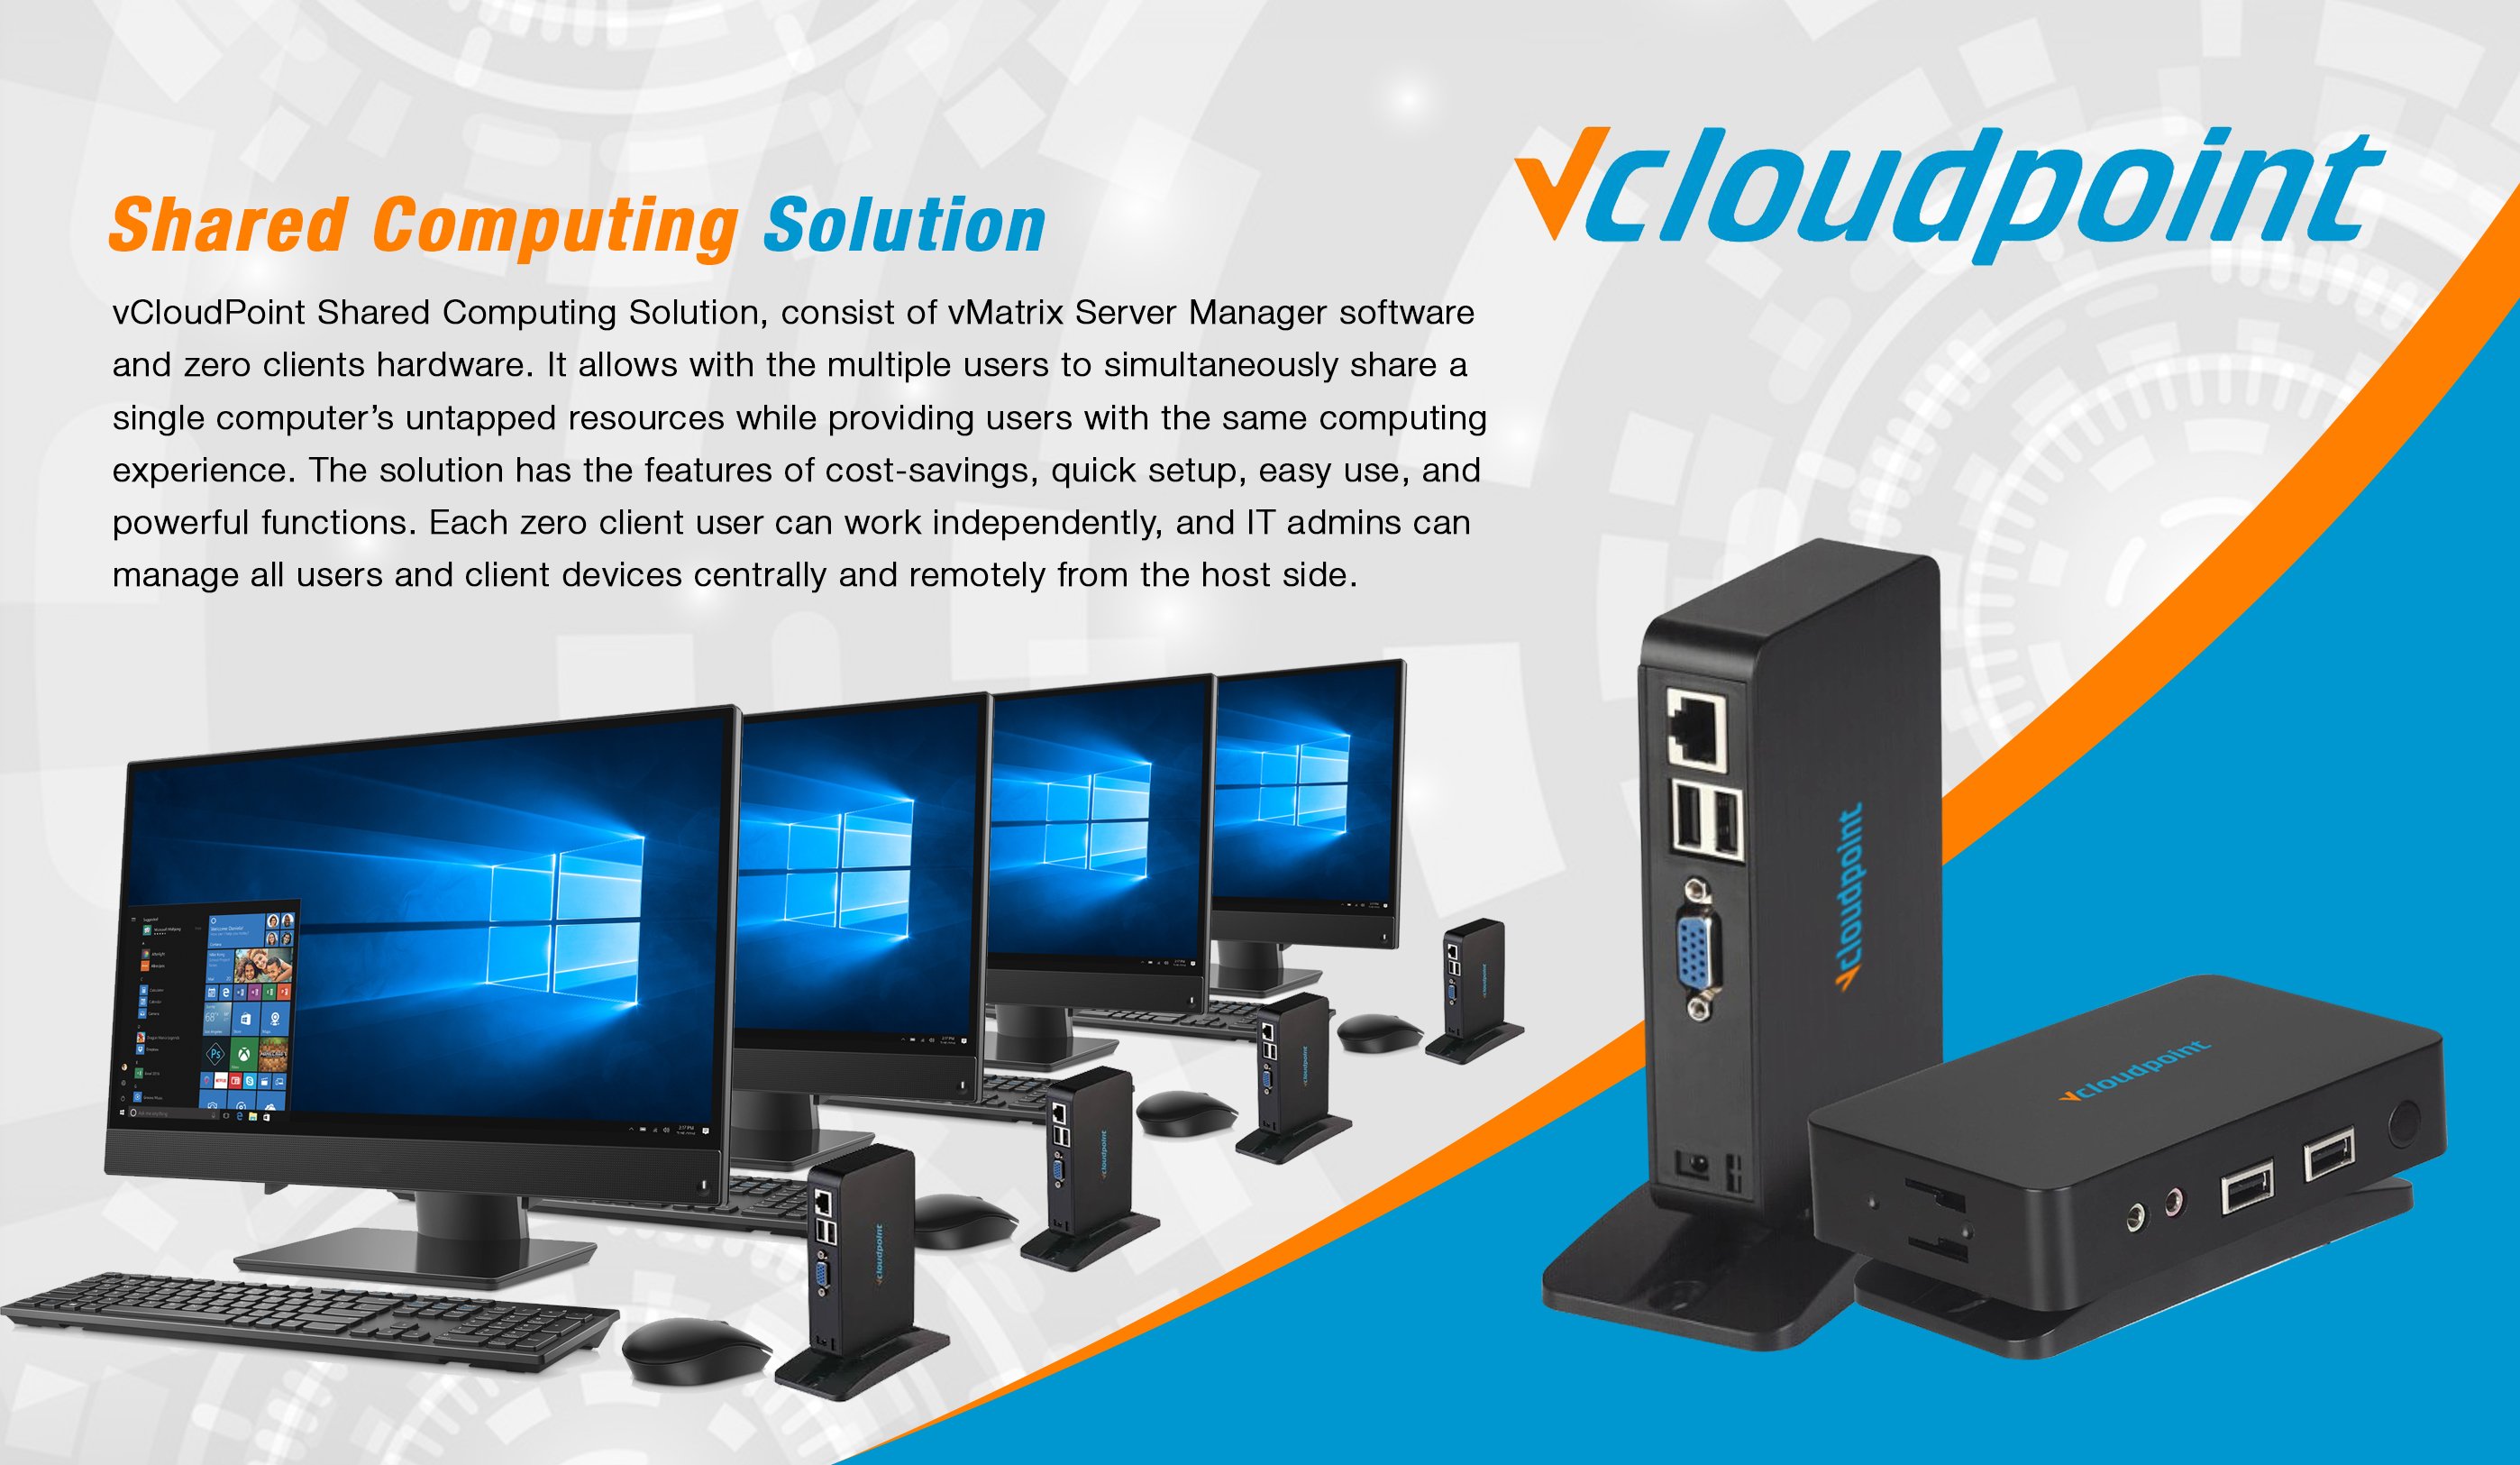 Vcloudpoint is an IT solution